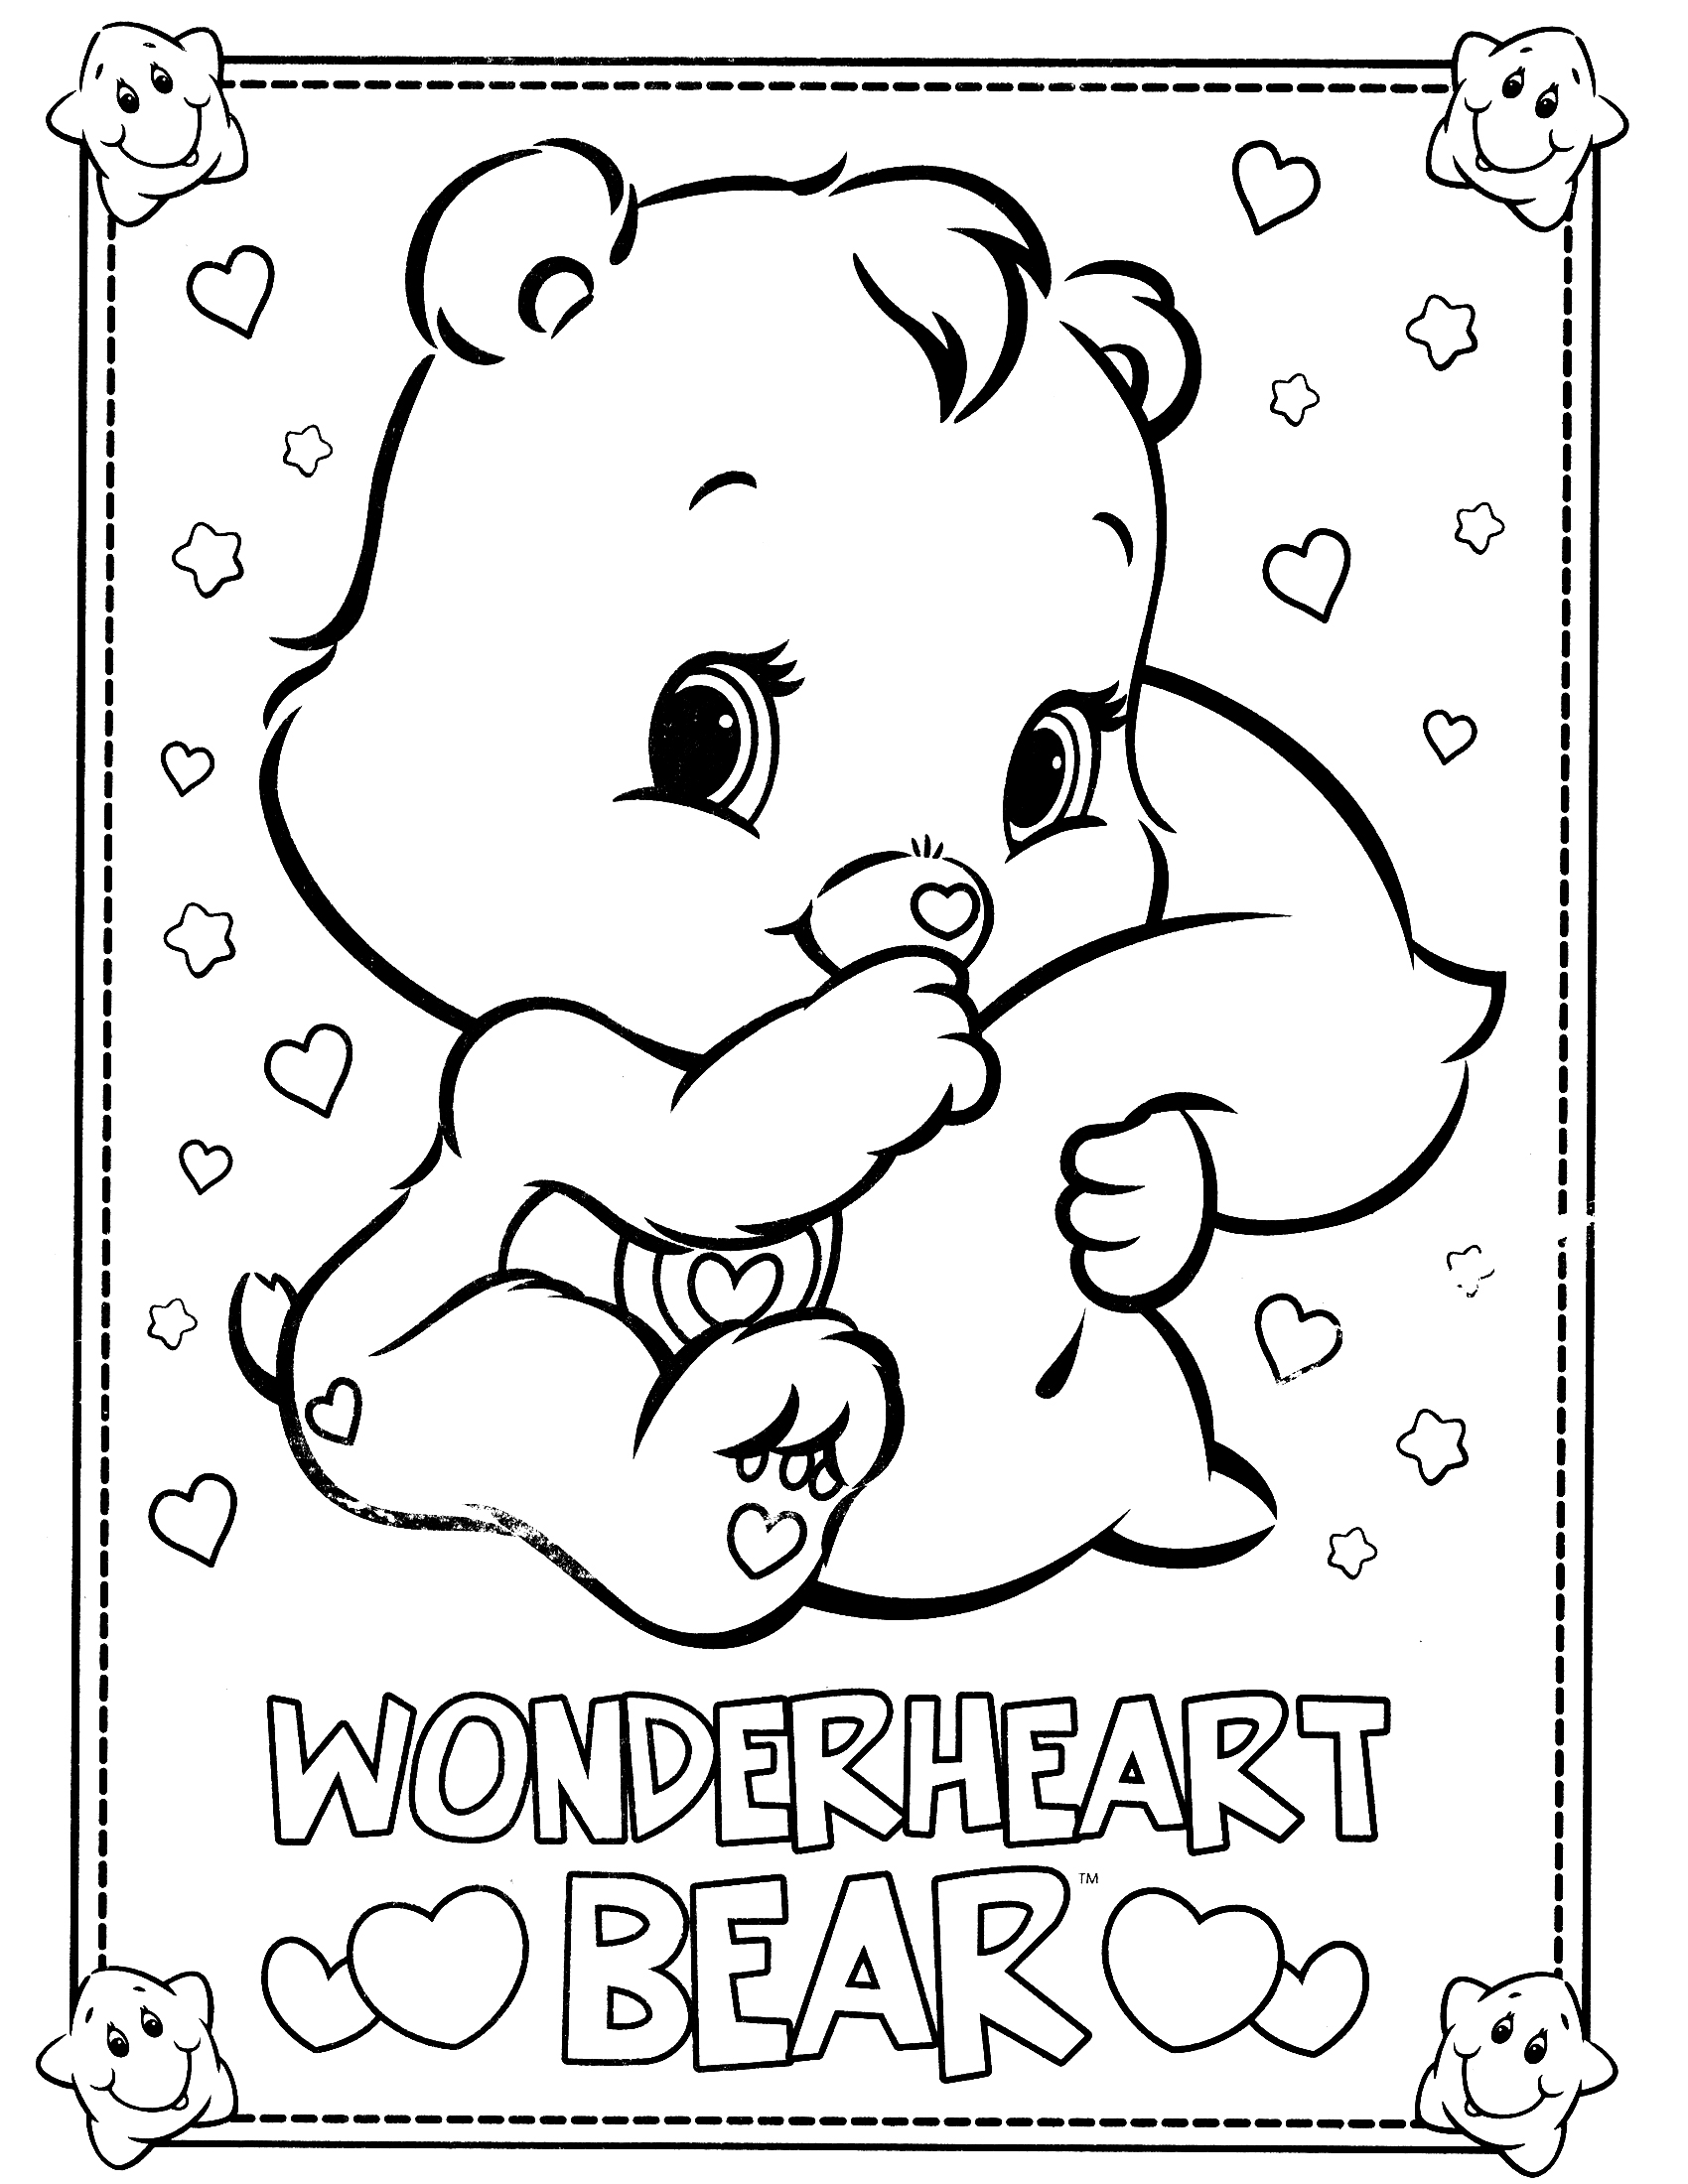 cheer-bear-coloring-pages-download-and-print-for-free